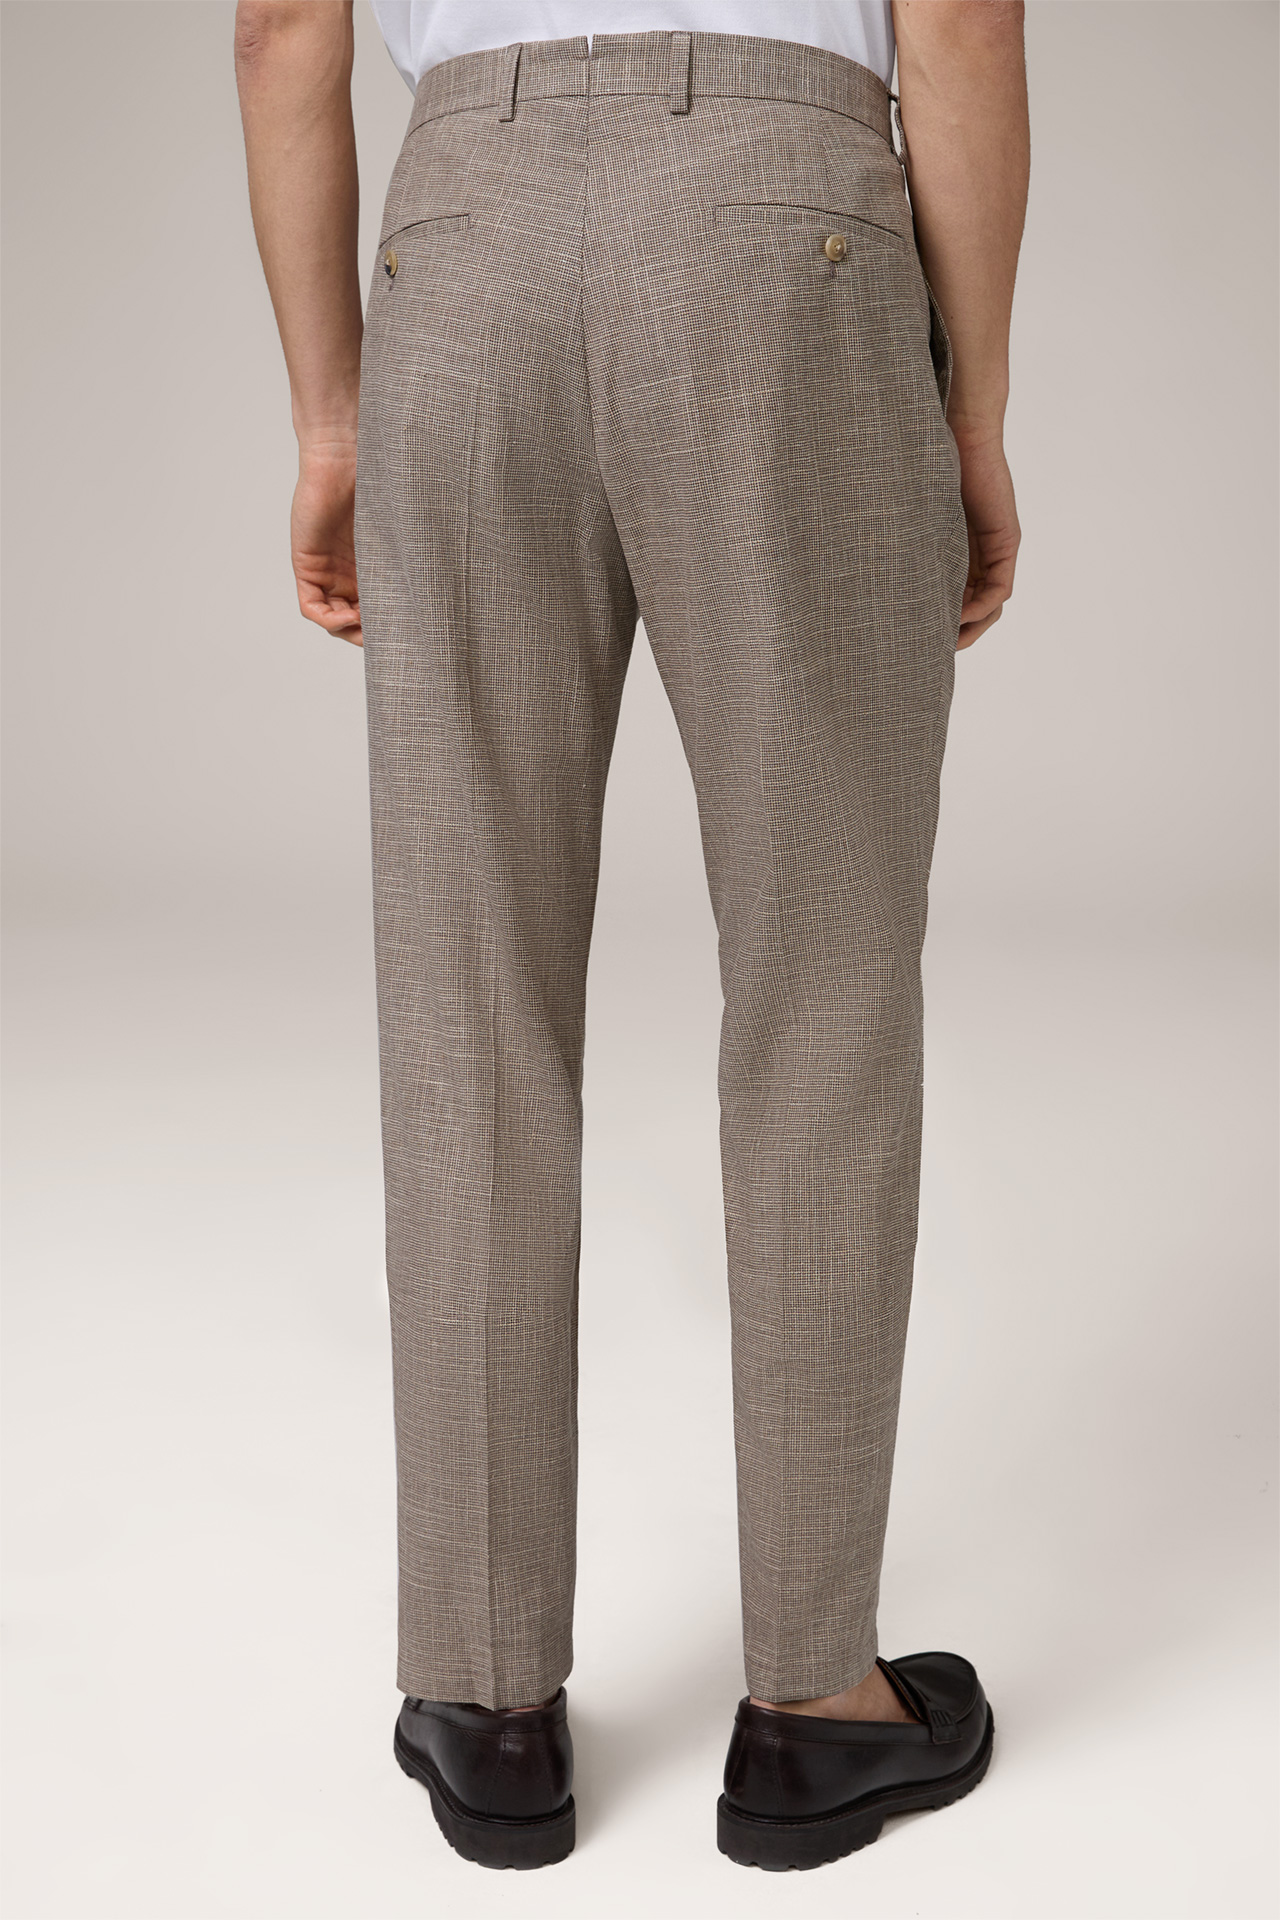 Silvi Modular Cotton Blend Trousers with Pleat-front in a Brown and Beige Pattern